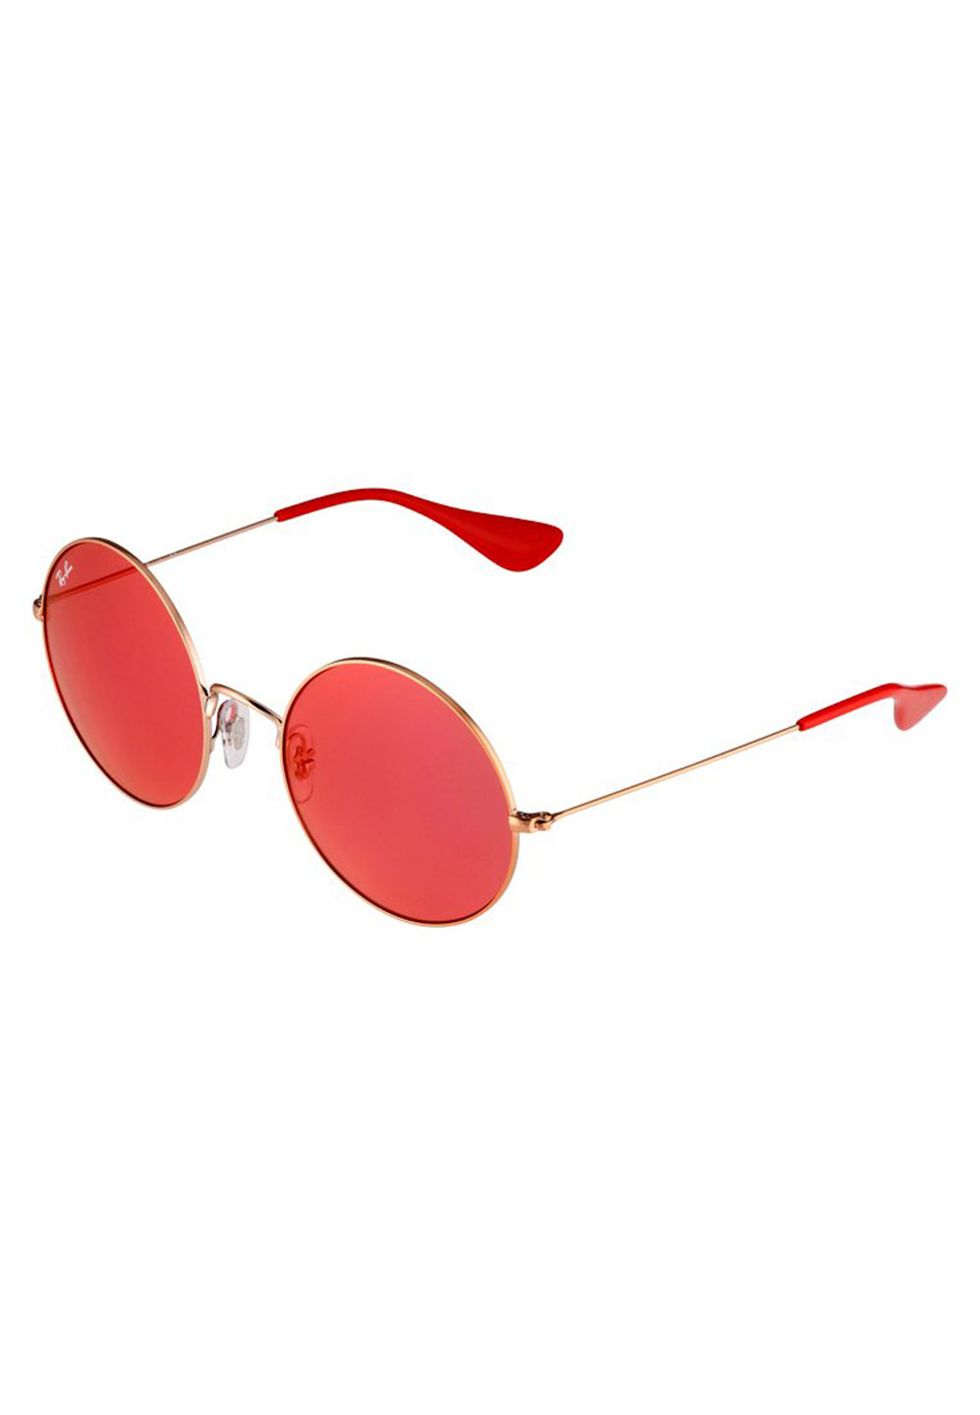 Eyewear, Sunglasses, Glasses, Personal protective equipment, aviator sunglass, Red, Vision care, Goggles, Eye glass accessory, Material property, 